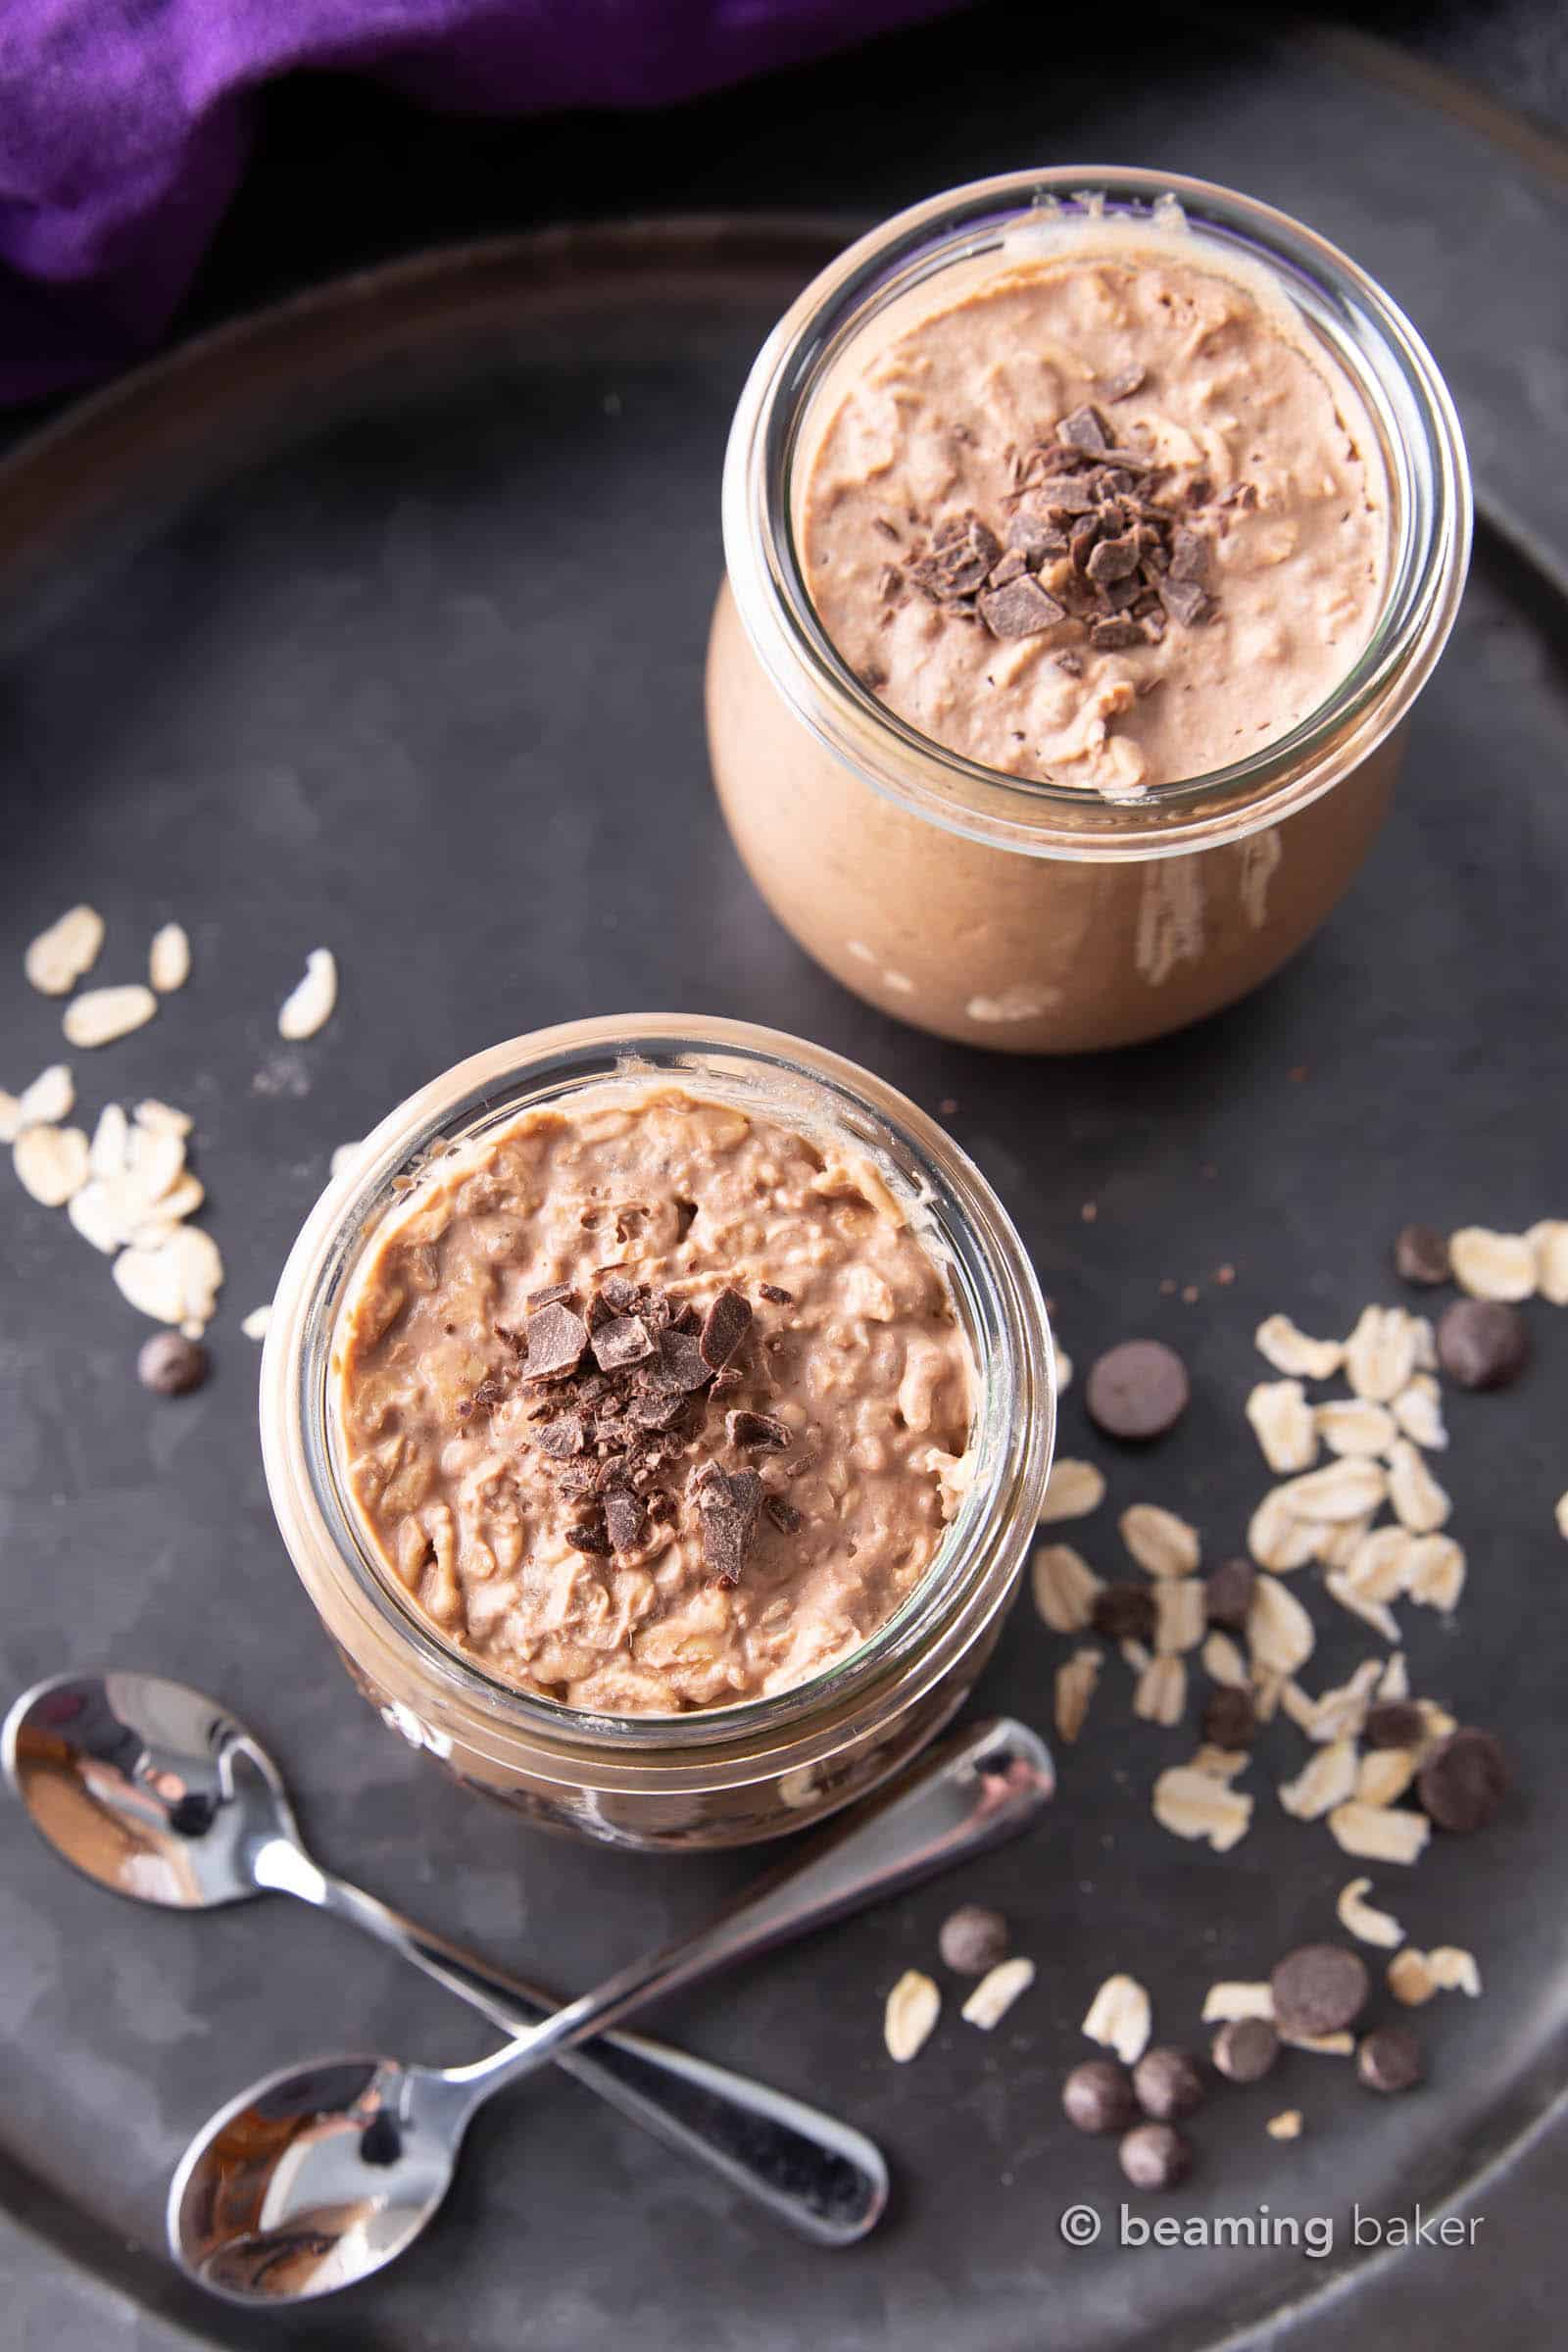 Chocolate Overnight Oats Recipe (Vegan): this rich & creamy chocolate overnight oats recipe is so EASY to make! Prep in minutes the night before for healthy overnight oats in a jar. #OvernightOats #Chocolate #Breakfast #Vegan | Recipe at BeamingBaker.com